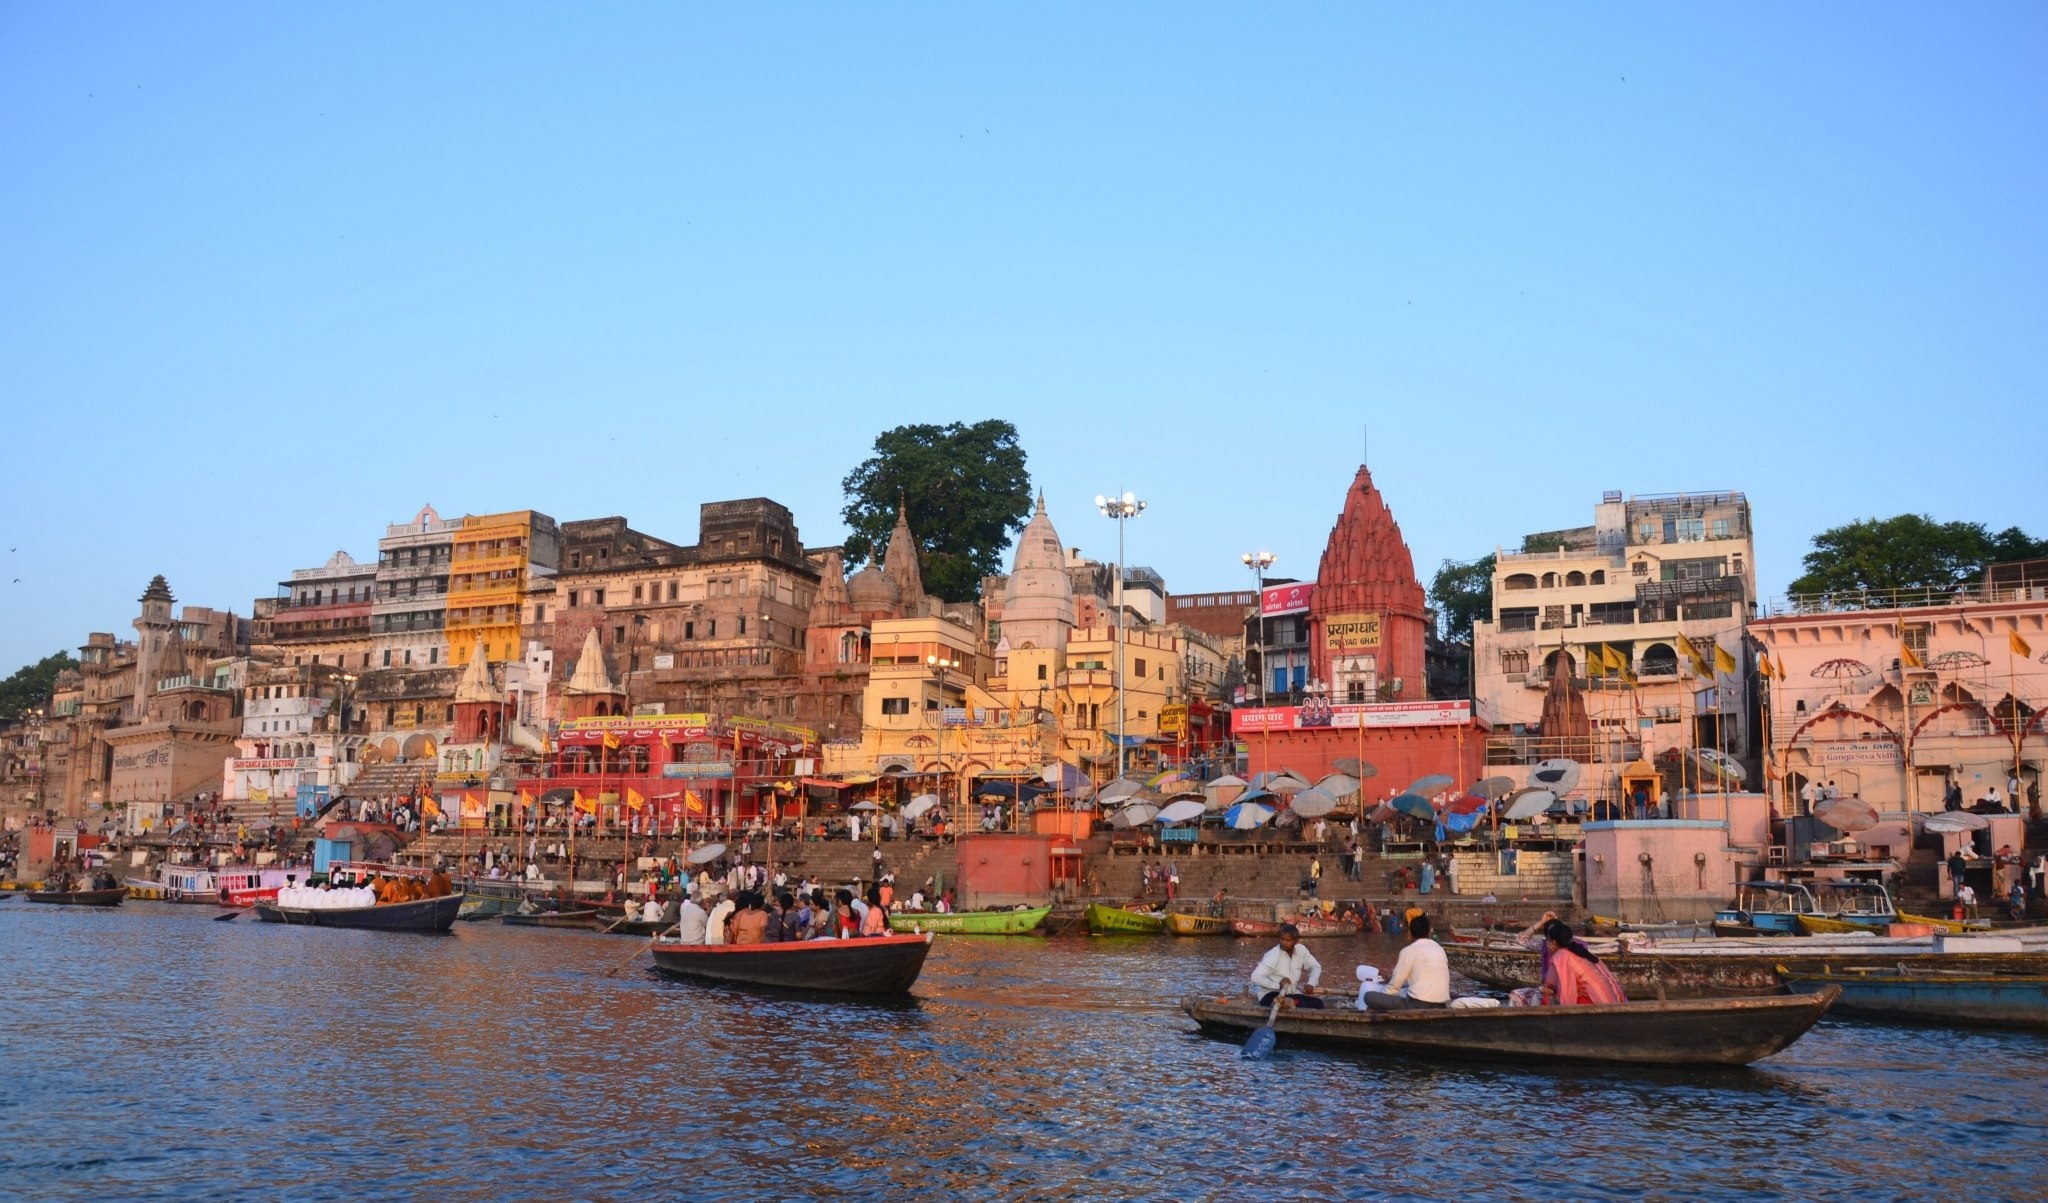 The Ganges river, septic water, holy swimming, travelxl visit, 2050x1210 HD Desktop